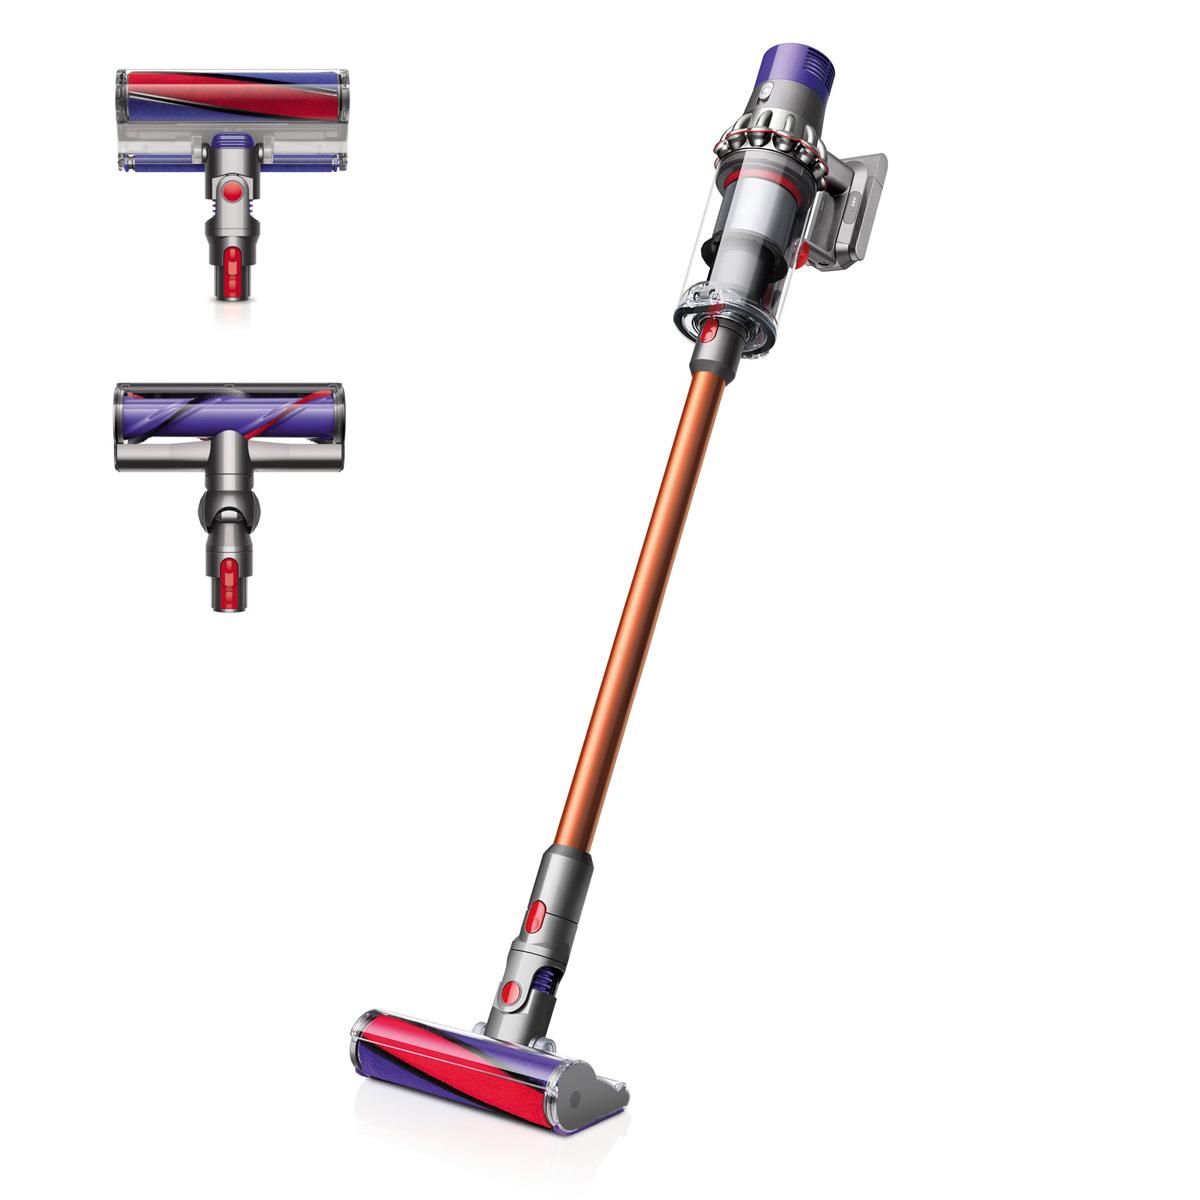 Dyson V10 Absolute Vacuum Cleaner with Docking Station for $279.99 Shipped